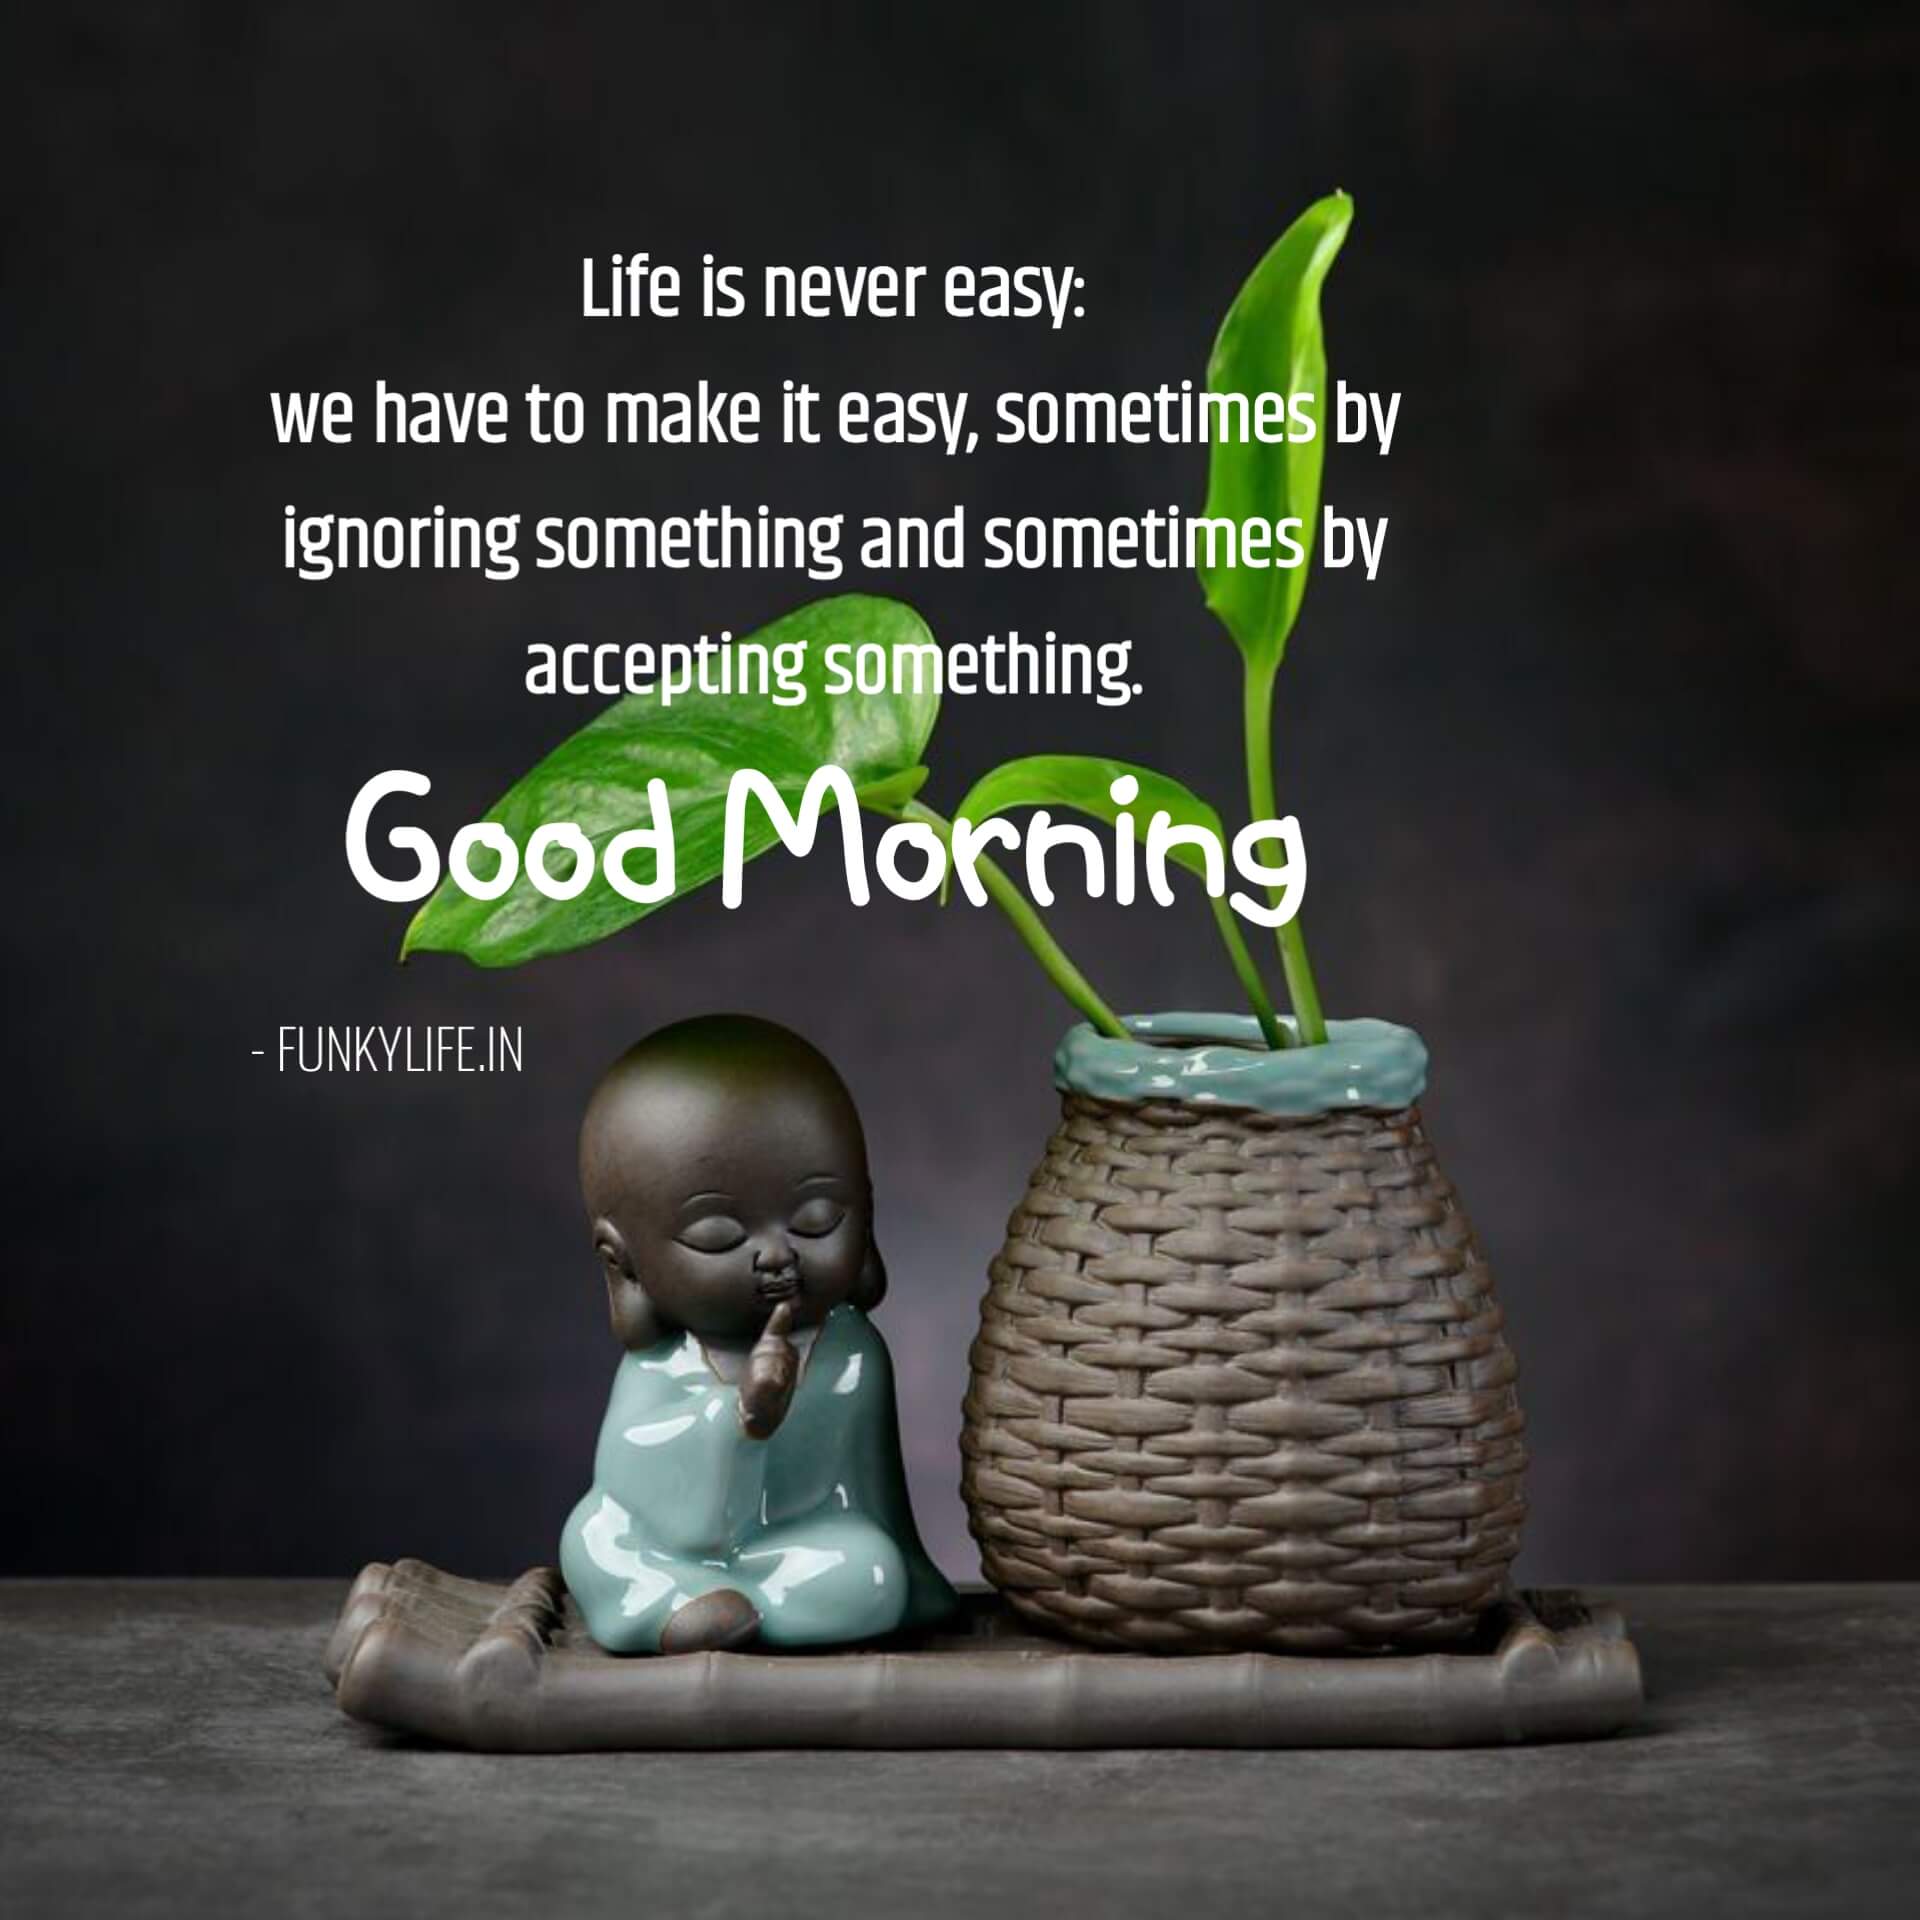 Beautiful Good Morning Quotes that's Inspire you every day